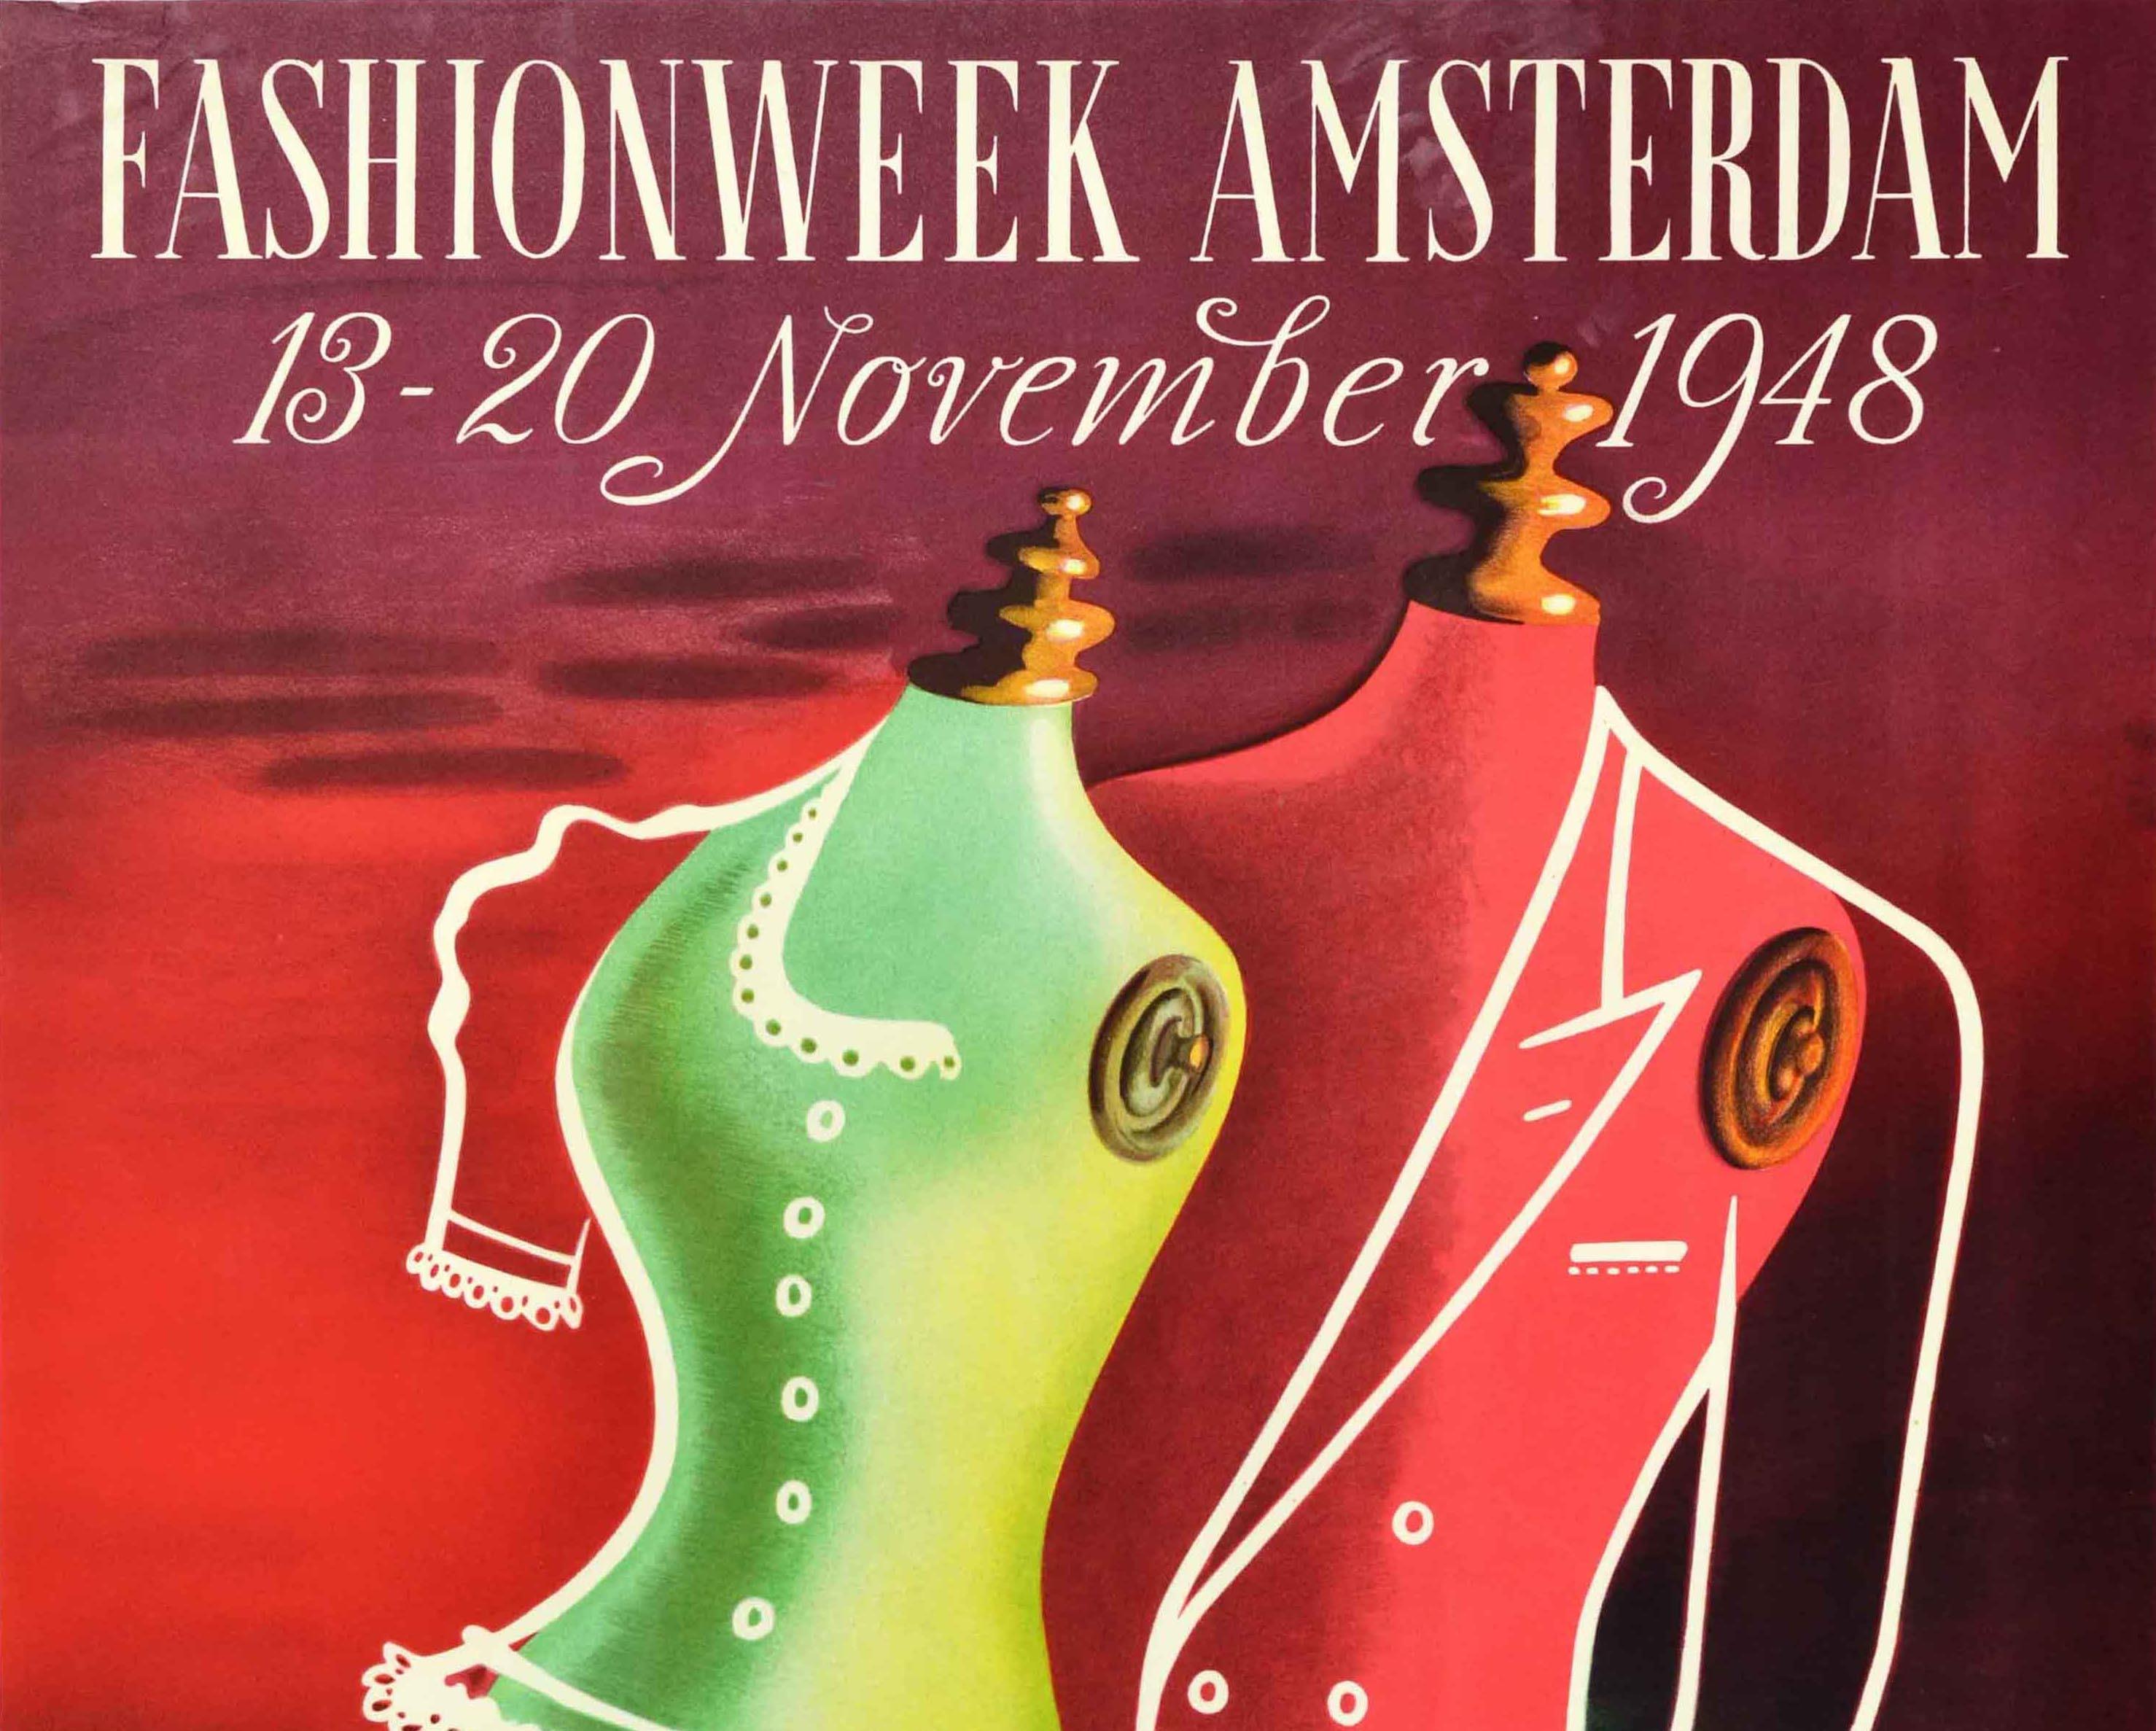 Original vintage advertising poster for the Fashion Week Amsterdam 13-20 November 1948 featuring a great mid-century design of two dressmaker's mannequin dummies in green and red, the one at the front with an outline of a lady's blouse and flowing